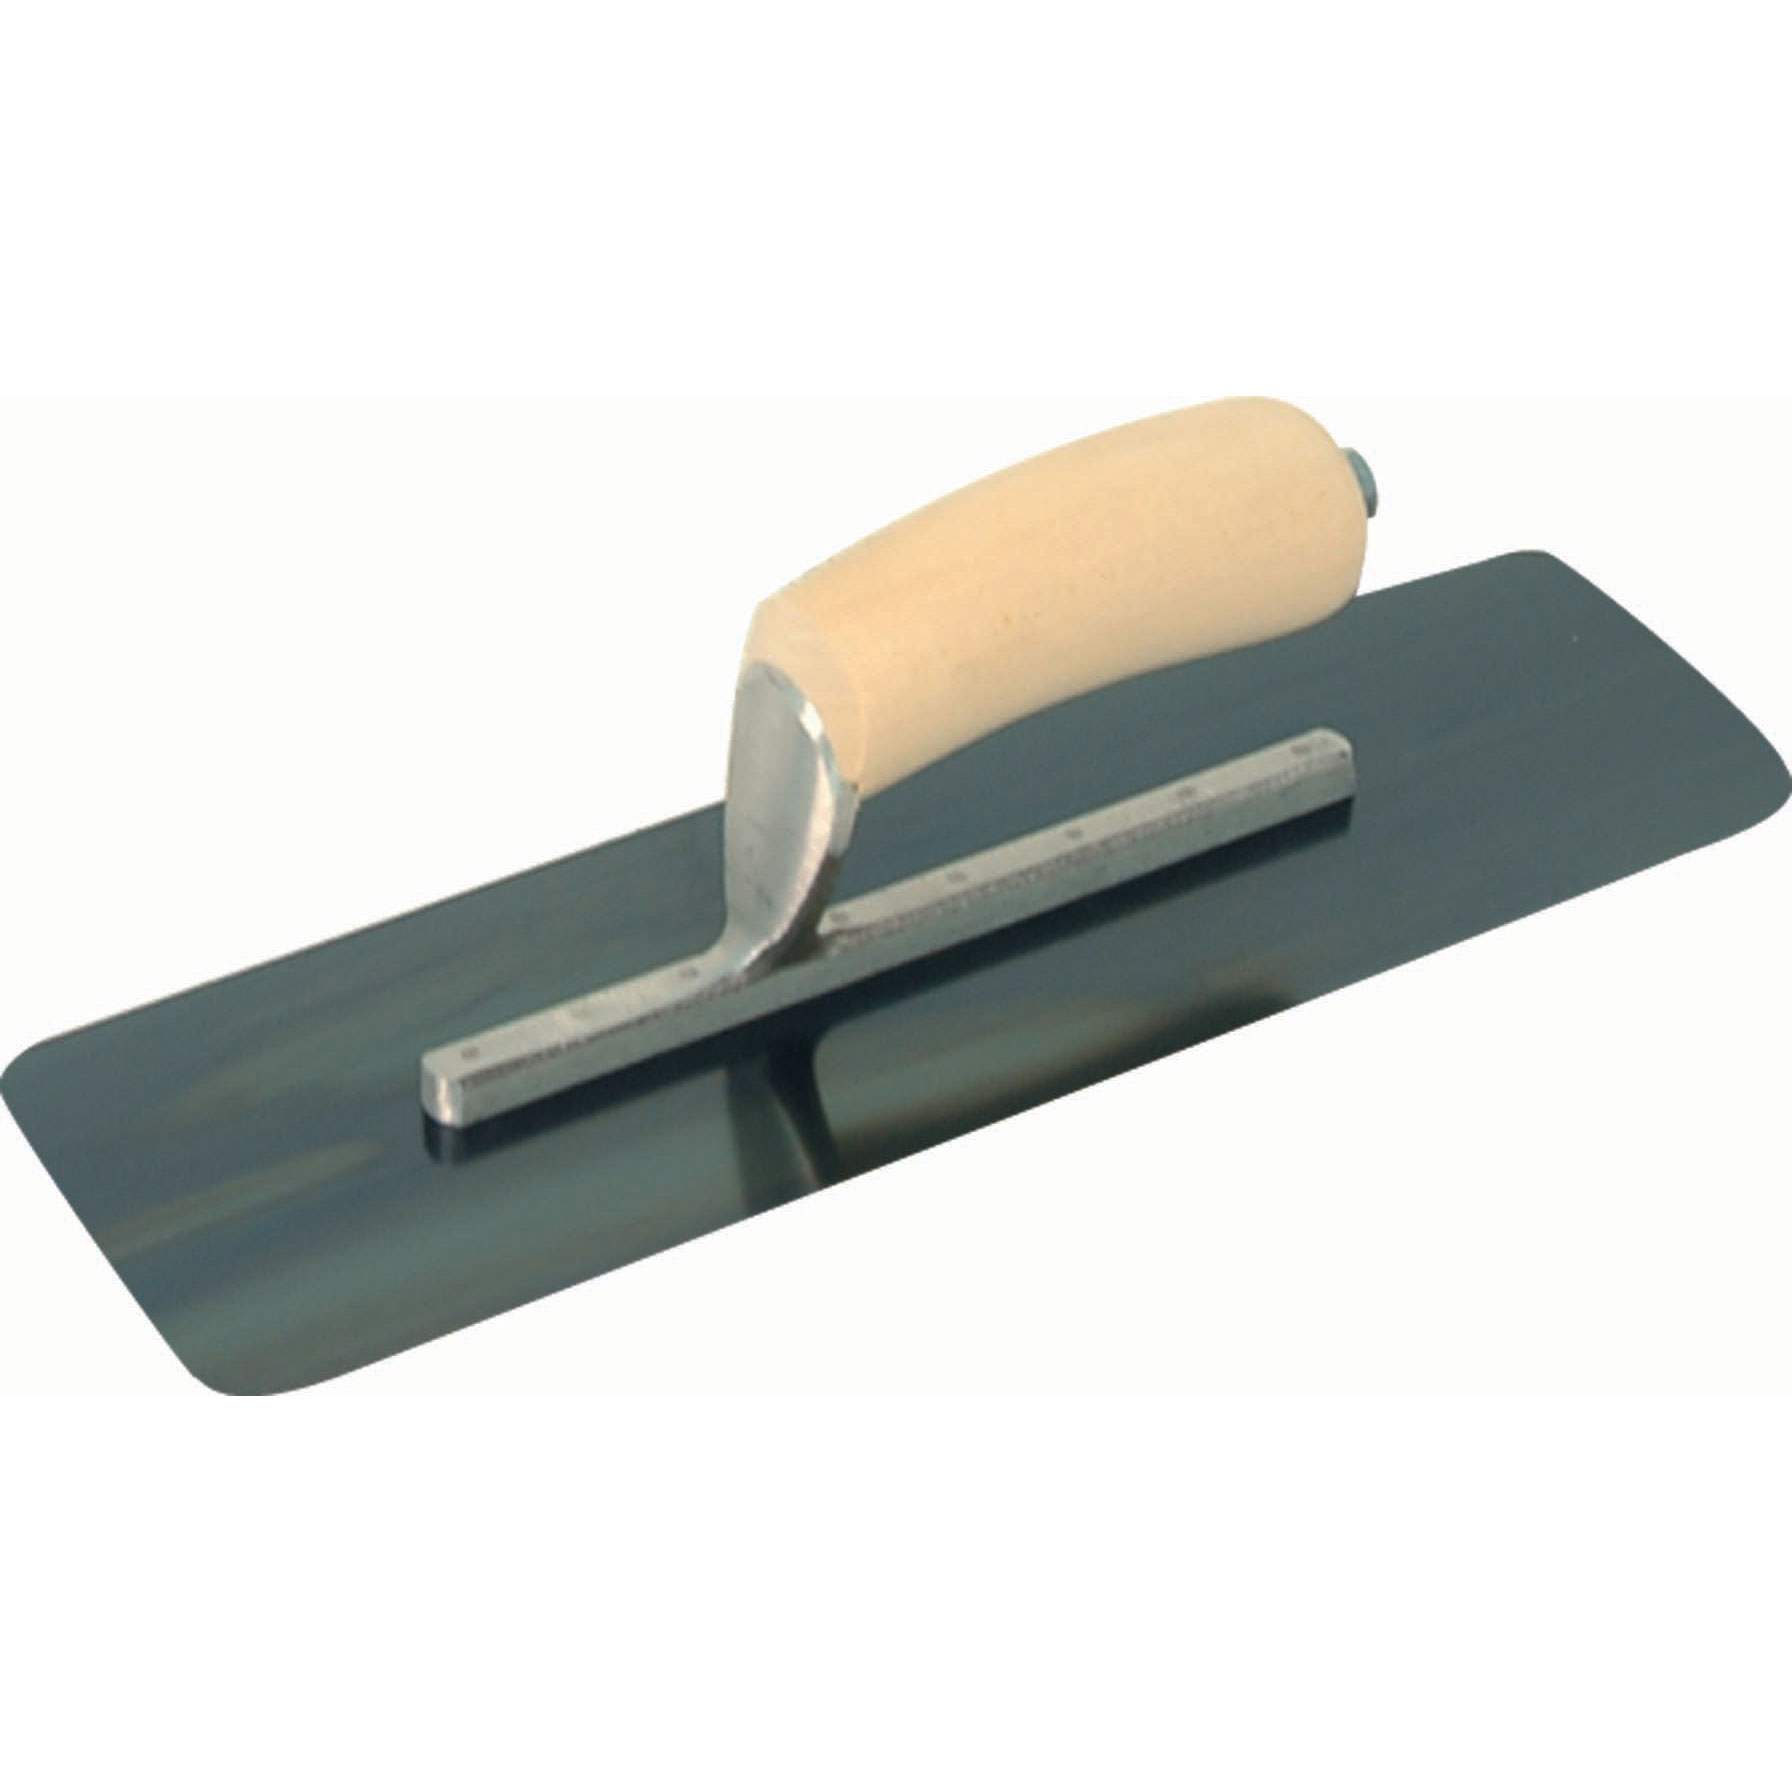 Marshalltown SP124BSER8 12in x 4in Flat End Trowel with Exposed Rivet Trowels and Wood Handle SP124BSER8